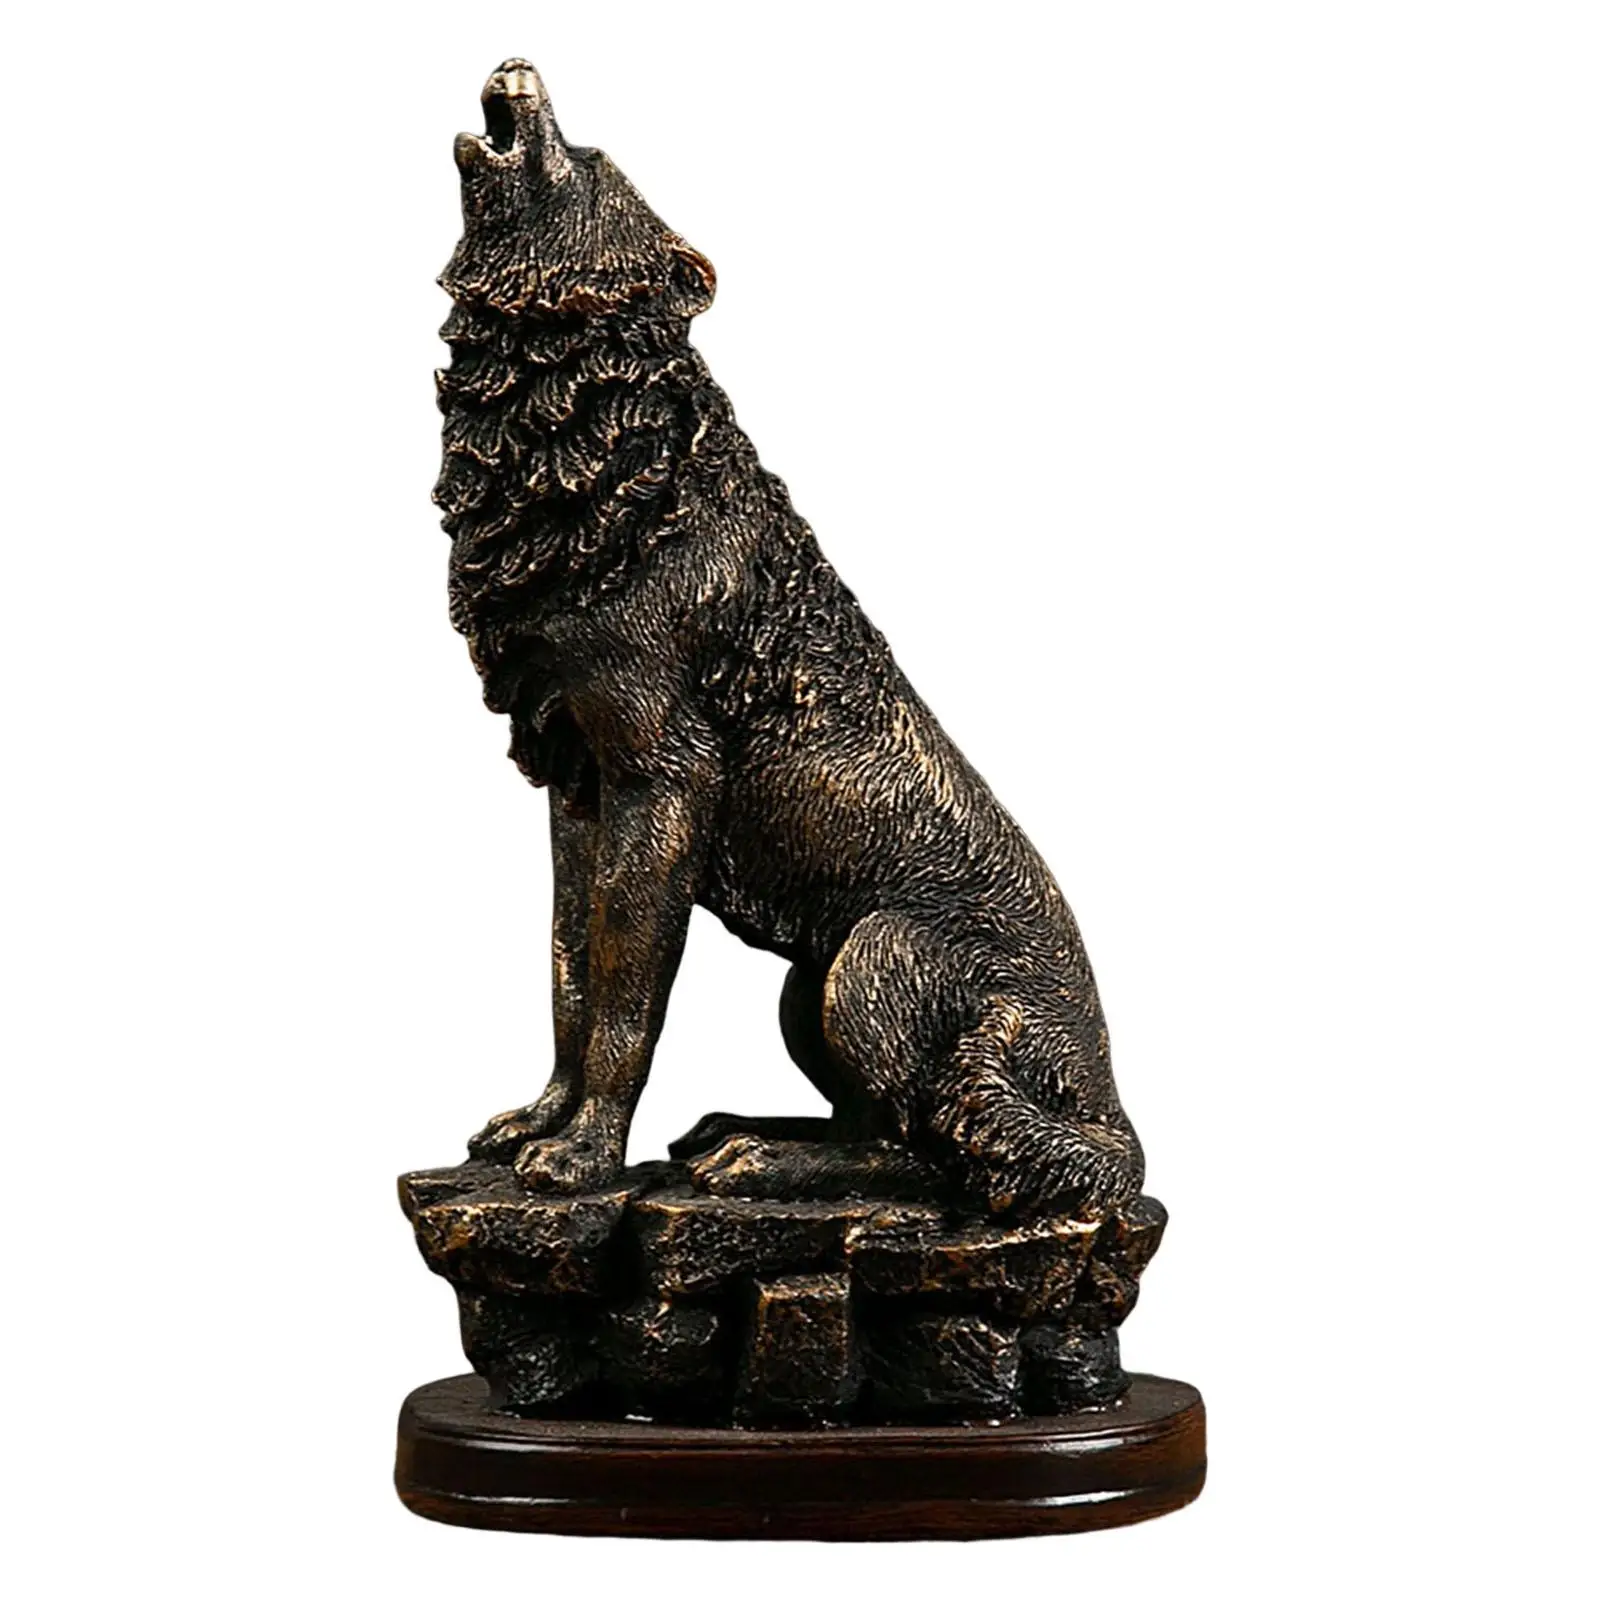 Wolf Figurine Table Ornament Resin Sculpture for Living Room Fireplace Home